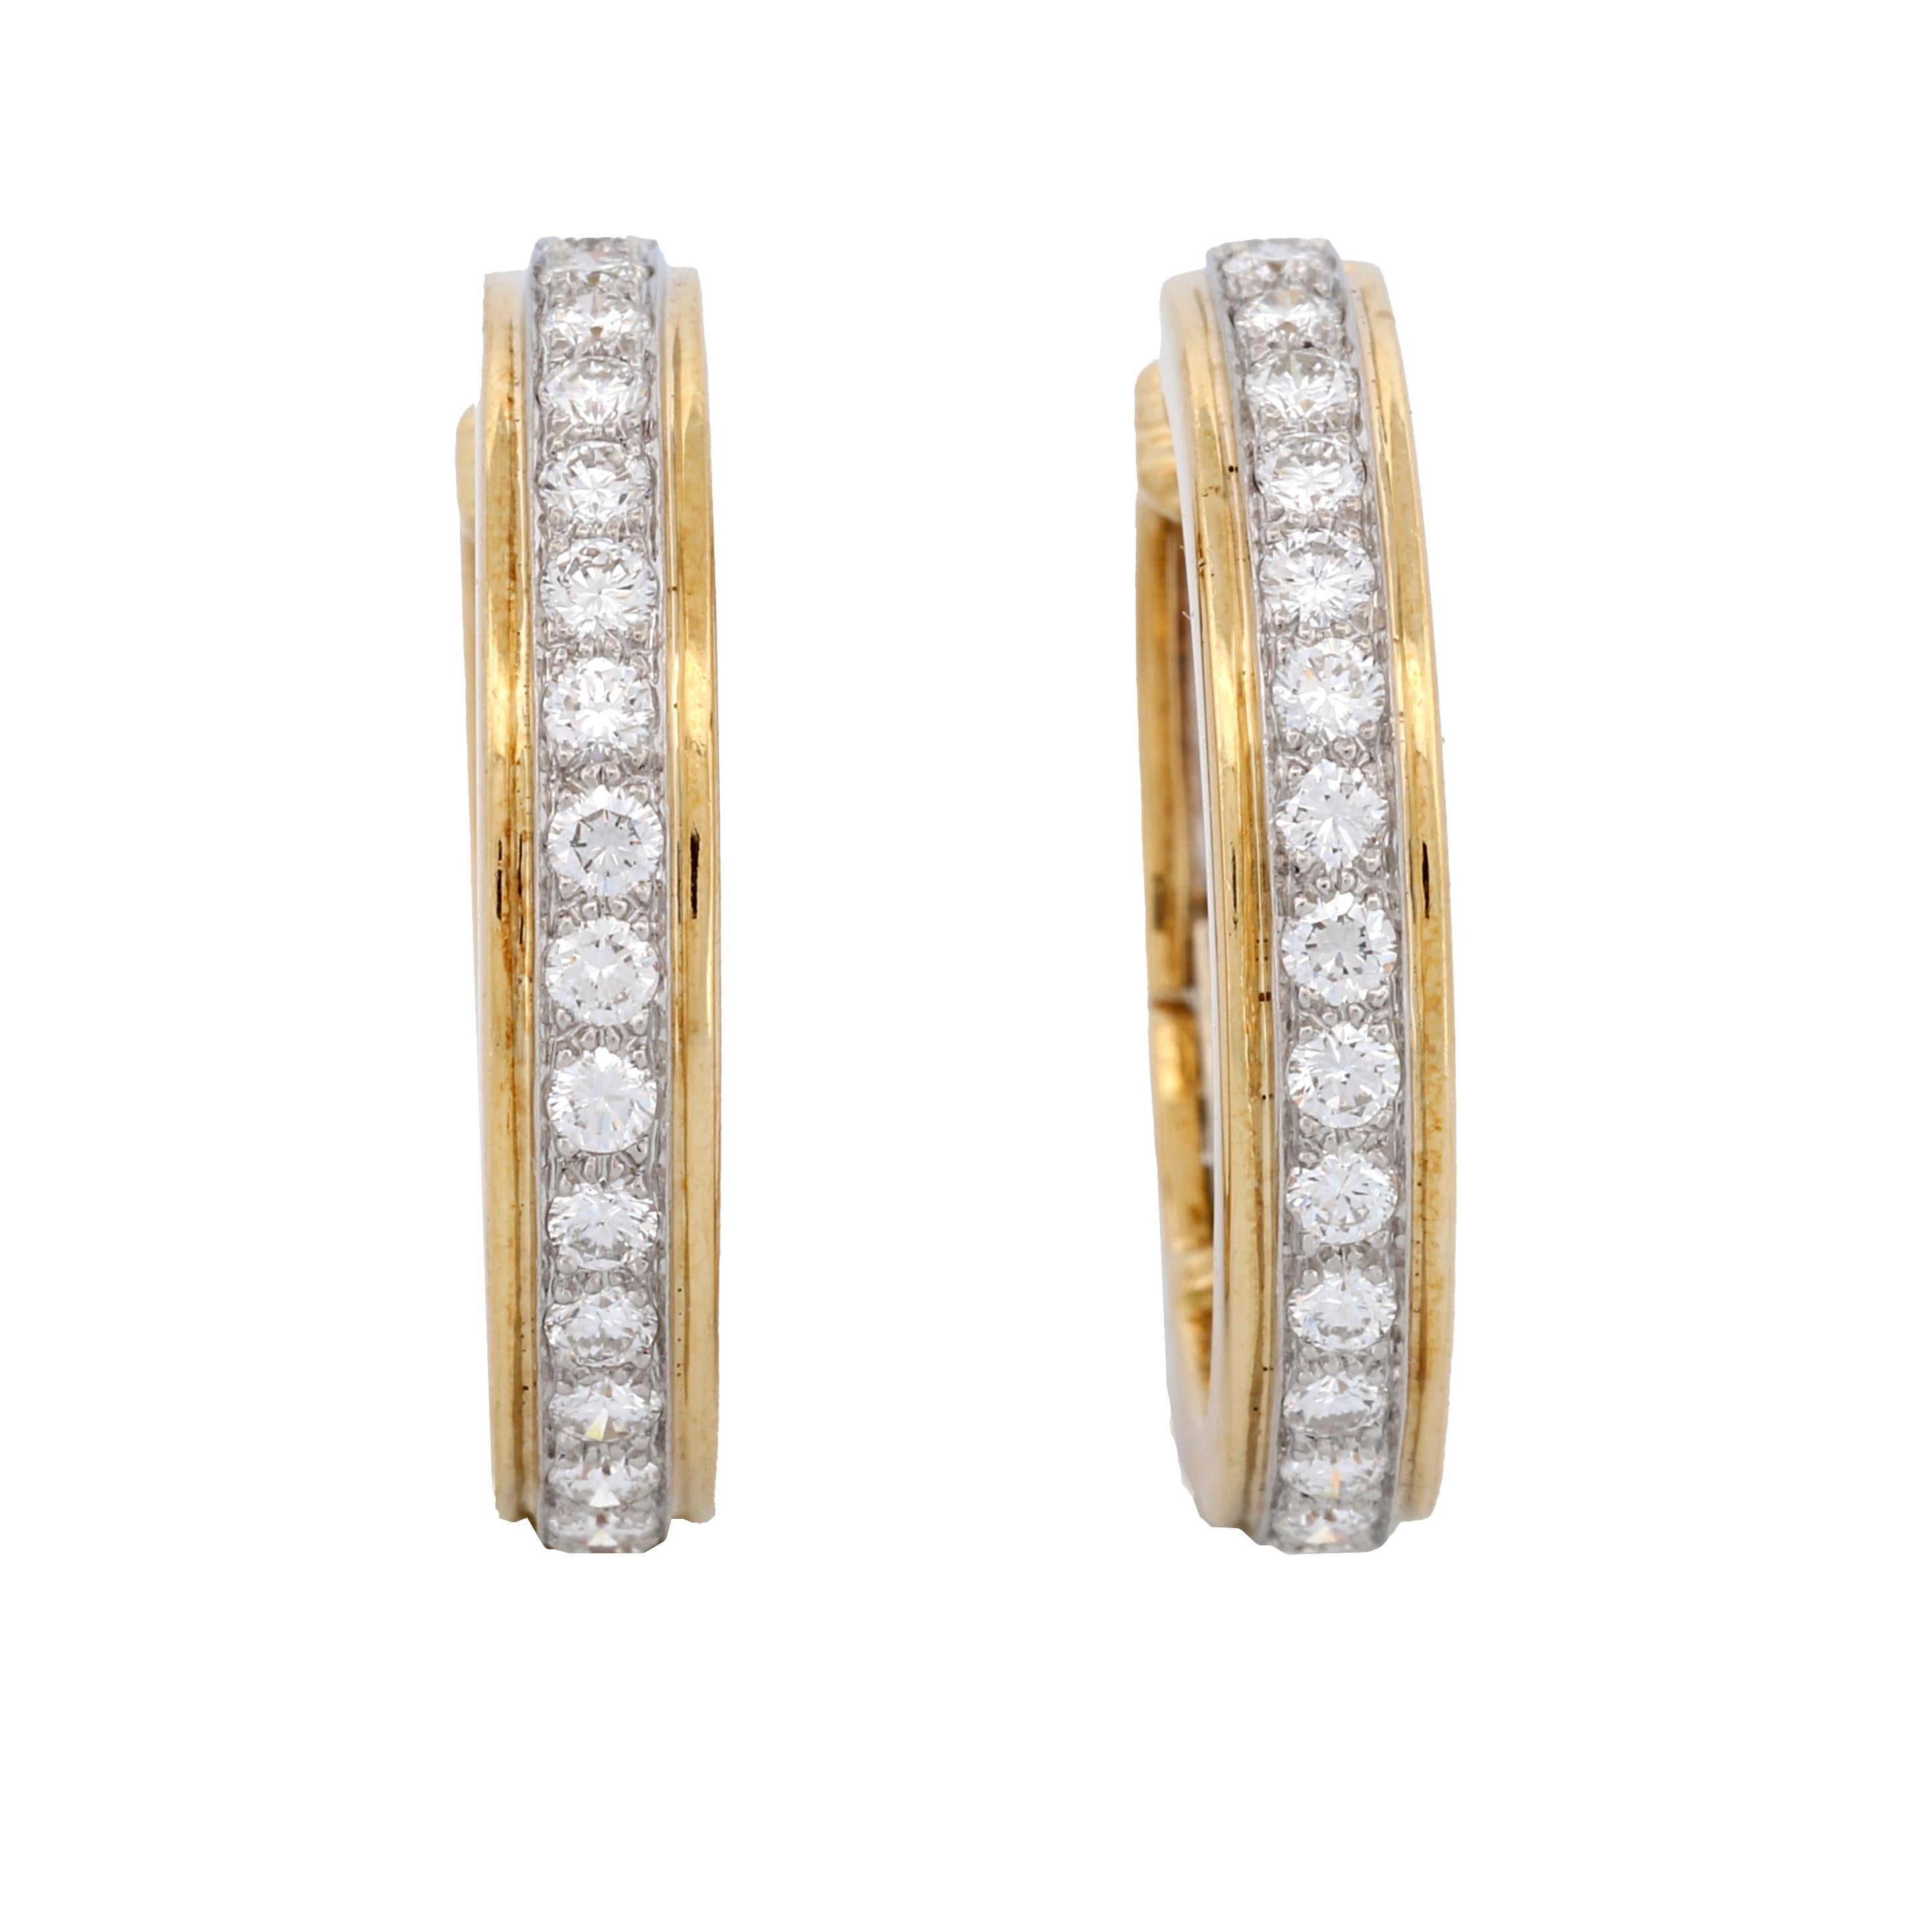 
Elevate your sense of elegance and luxury with these breathtakingly stunning diamond hoop earrings from the renowned Tiffany & Co. Crafted with an unmatched level of precision and care. These earrings embody the essence of sophistication and